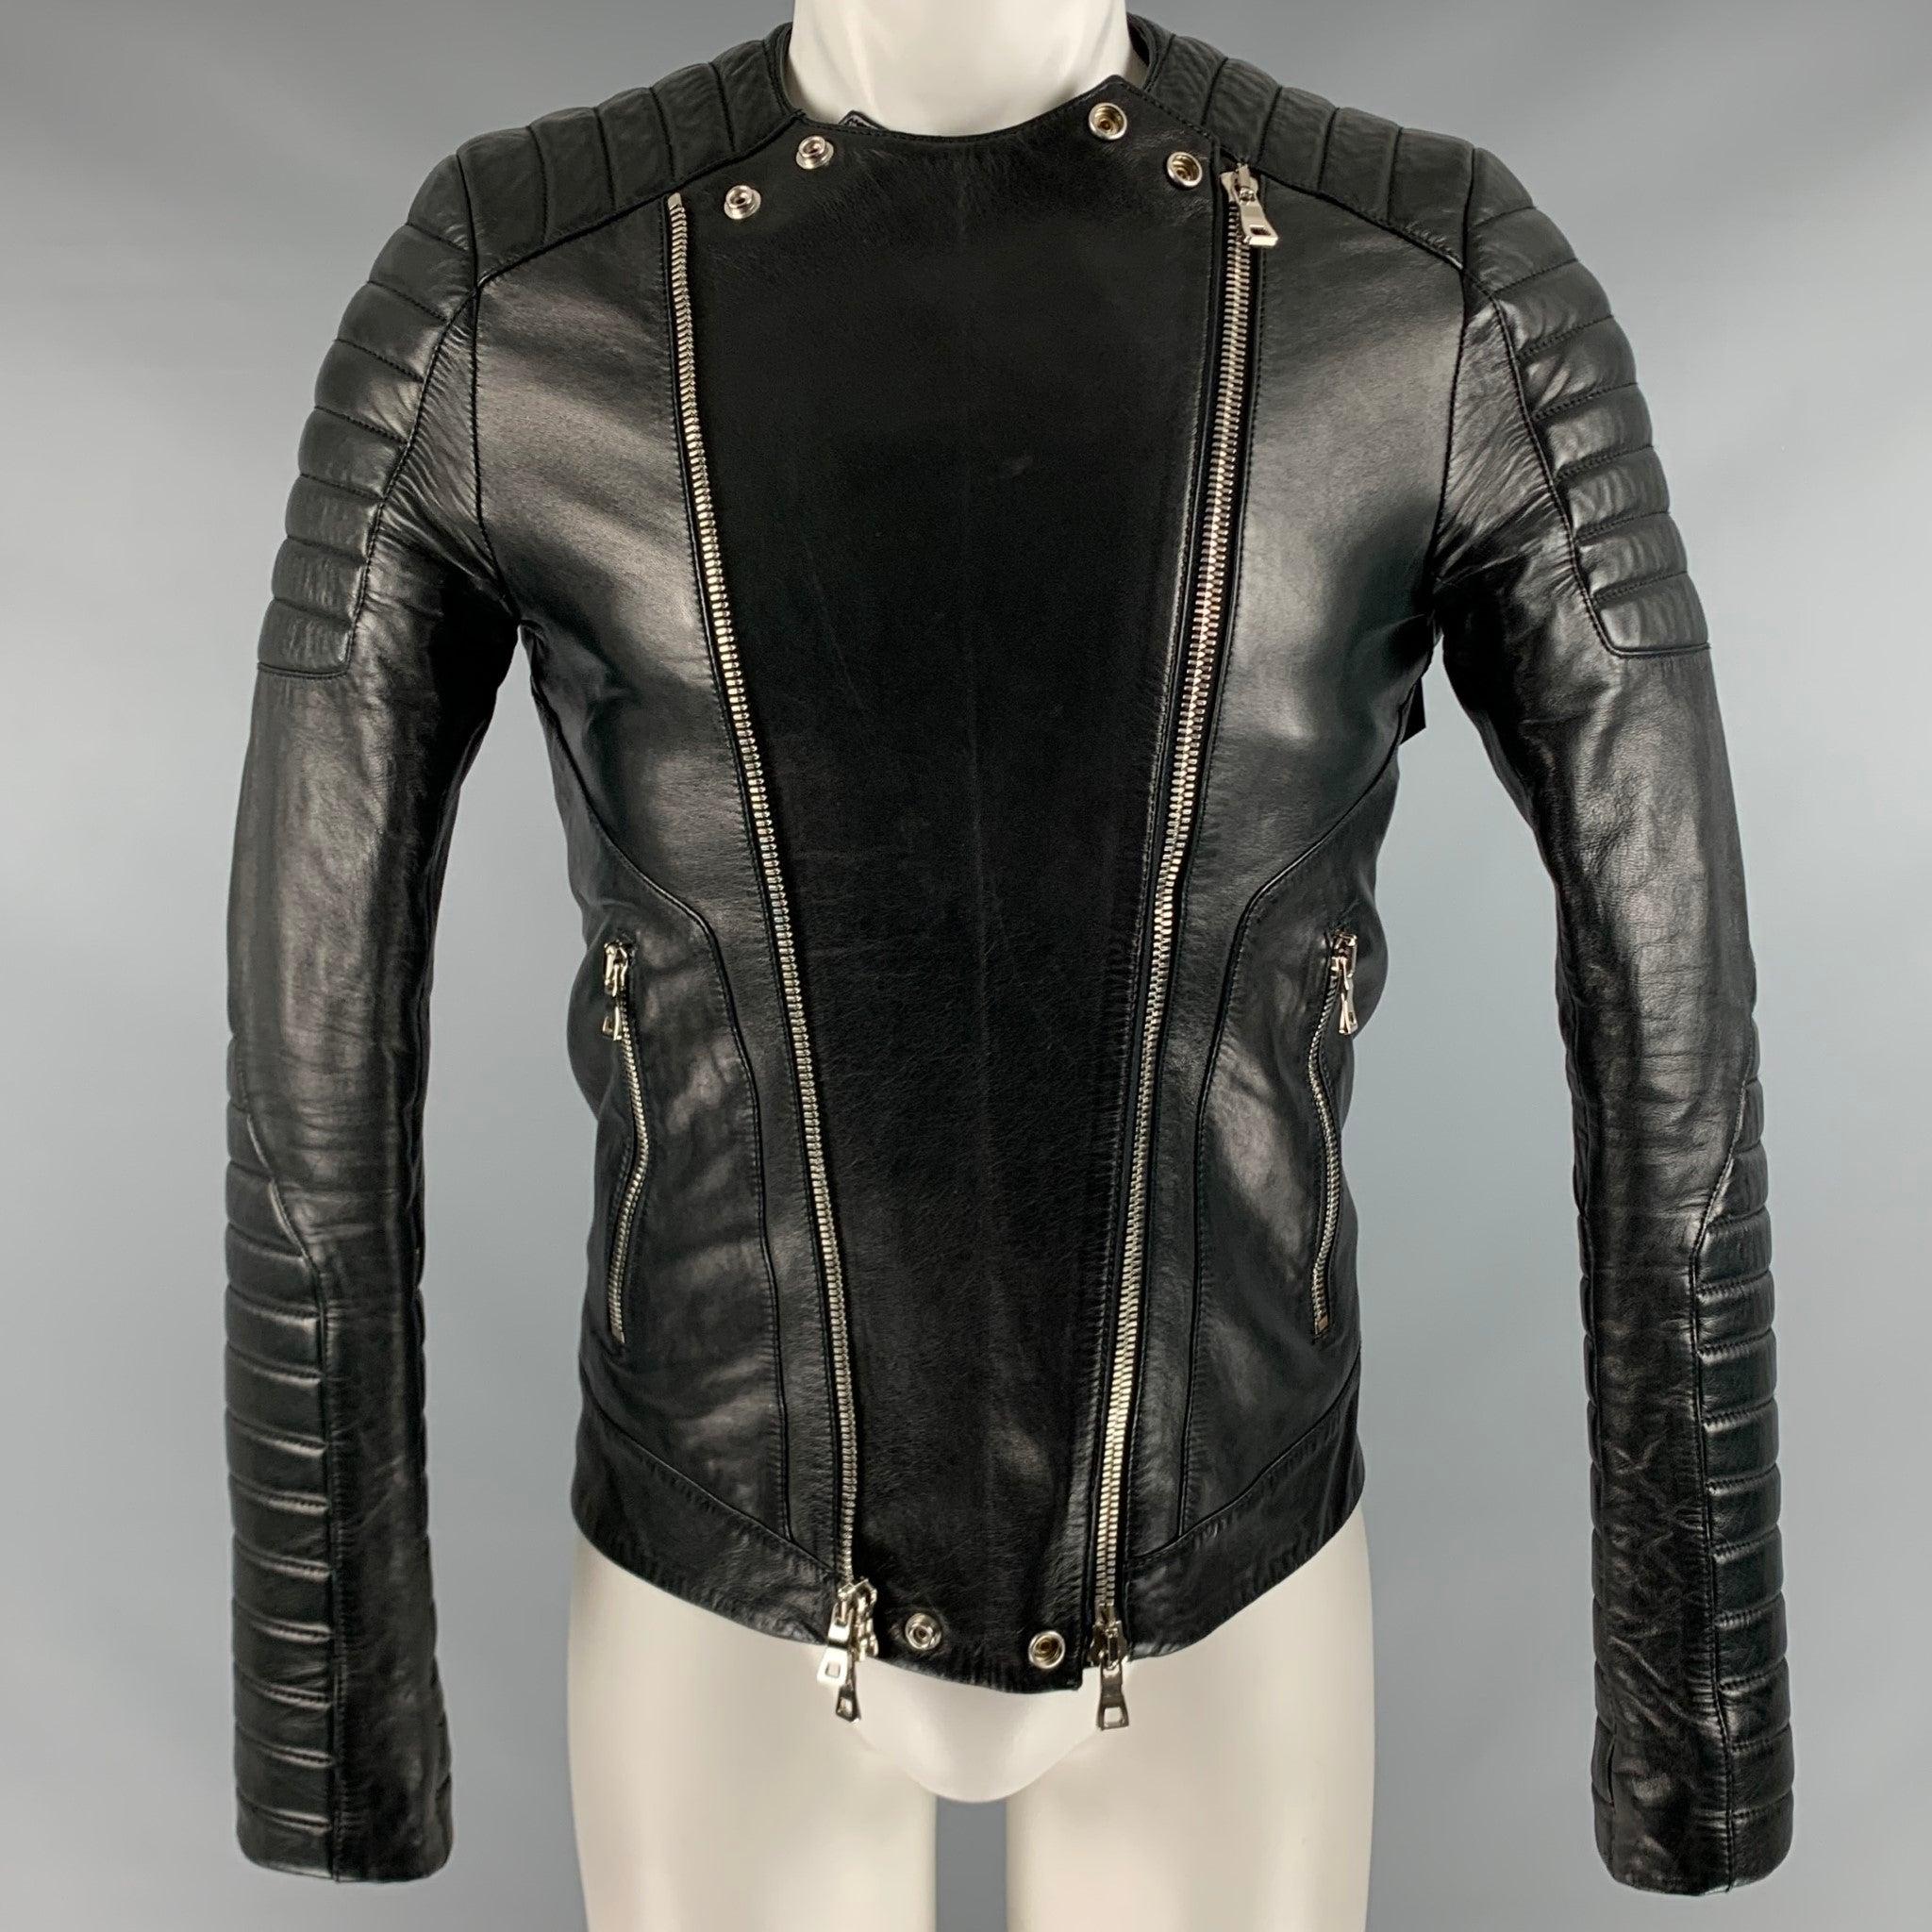 BALMAIN jacket
in a black lambskin leather fabric featuring motorcycle style, quilted sleeves, and an open front double zipper that can be converted to one asymmetrical zipper closure (see photos).Very Good Pre-Owned Condition. Minor signs of wear.